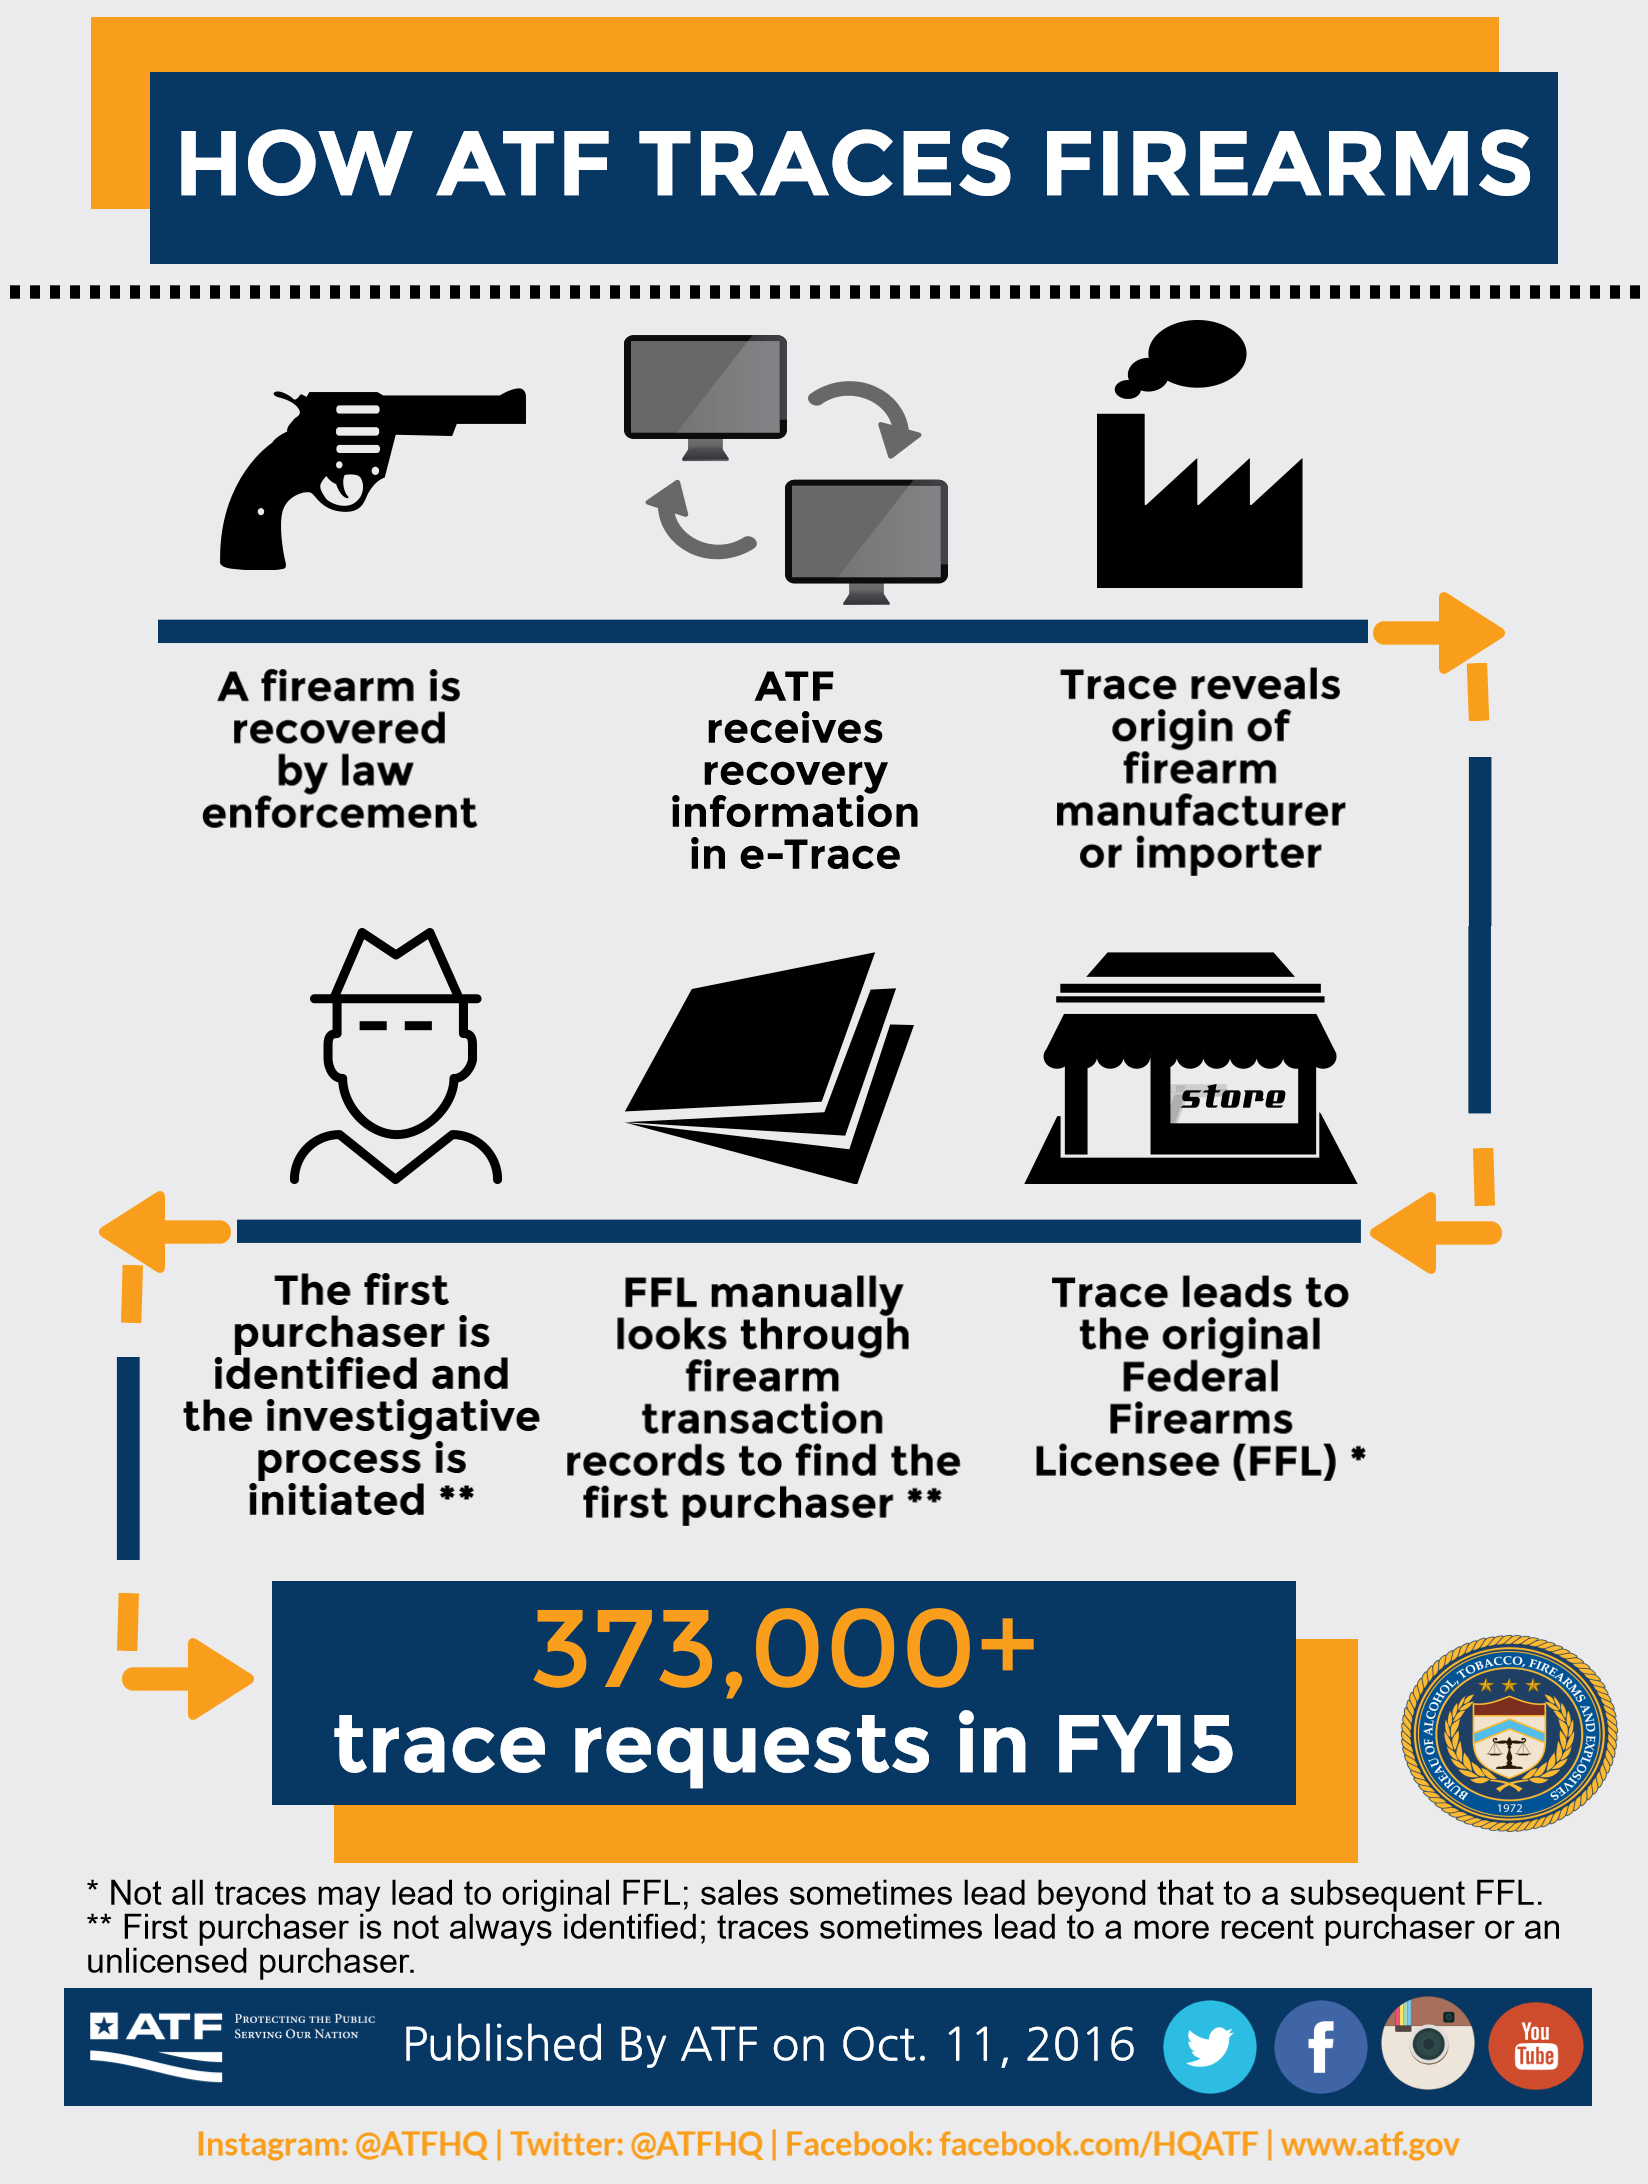 A firearm is recovered by law enforcement. ATF receives recovery information in e-Trace. Trace reveals origin of firearm manufacturer or importer. Trace leads to the original Federal Firearms Licensee (FFL).